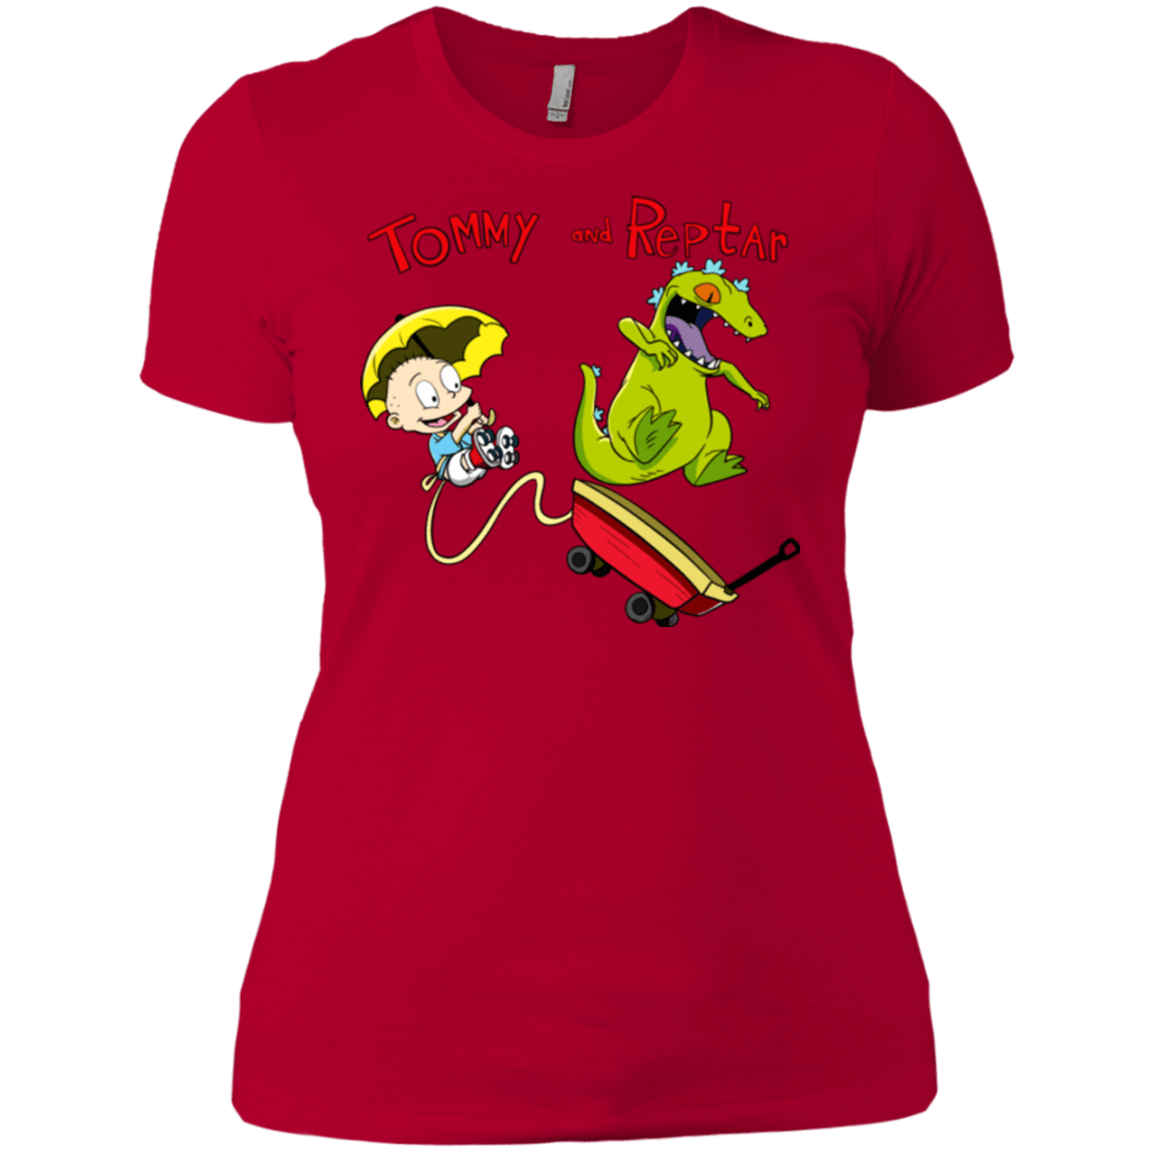 Tommy and Reptar Women's Premium T-Shirt